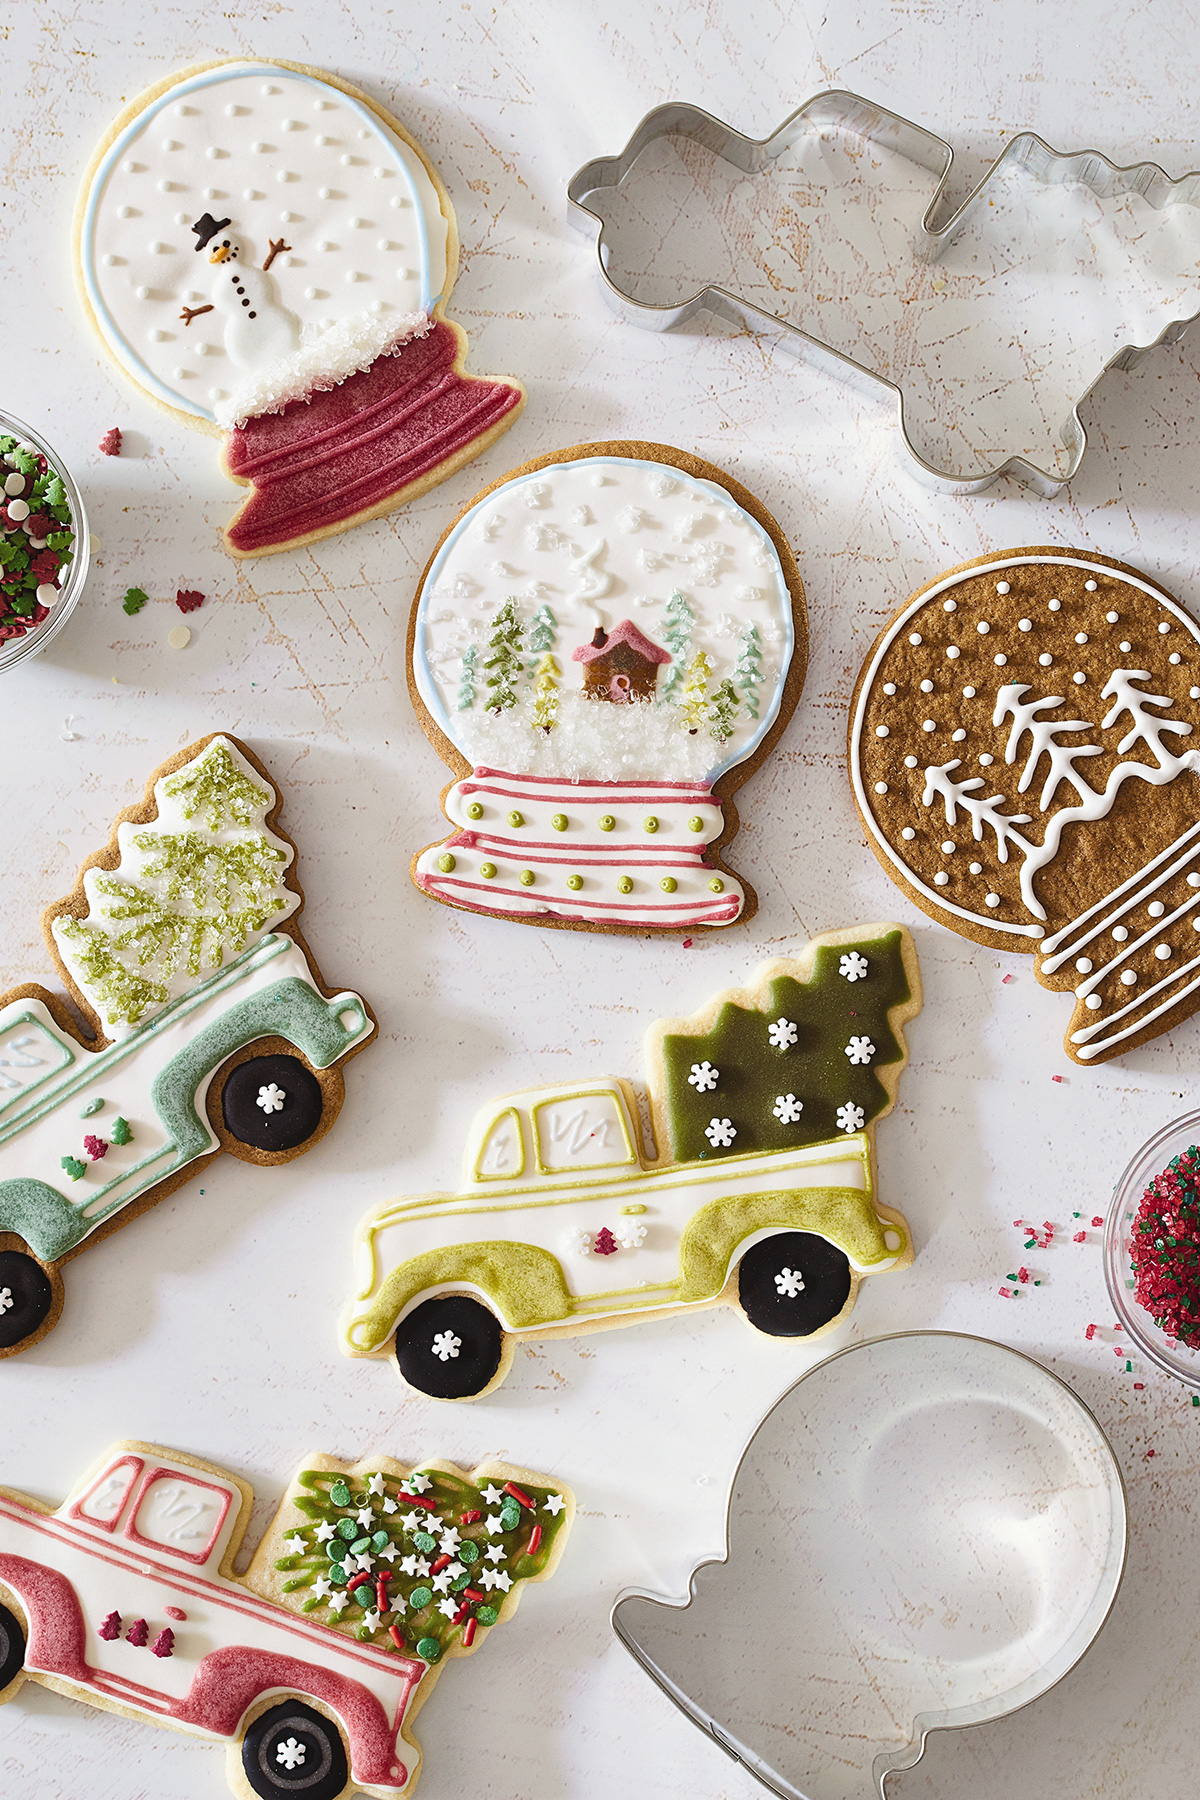 A selection of Christmas cookies decorated with naturally-colored icing